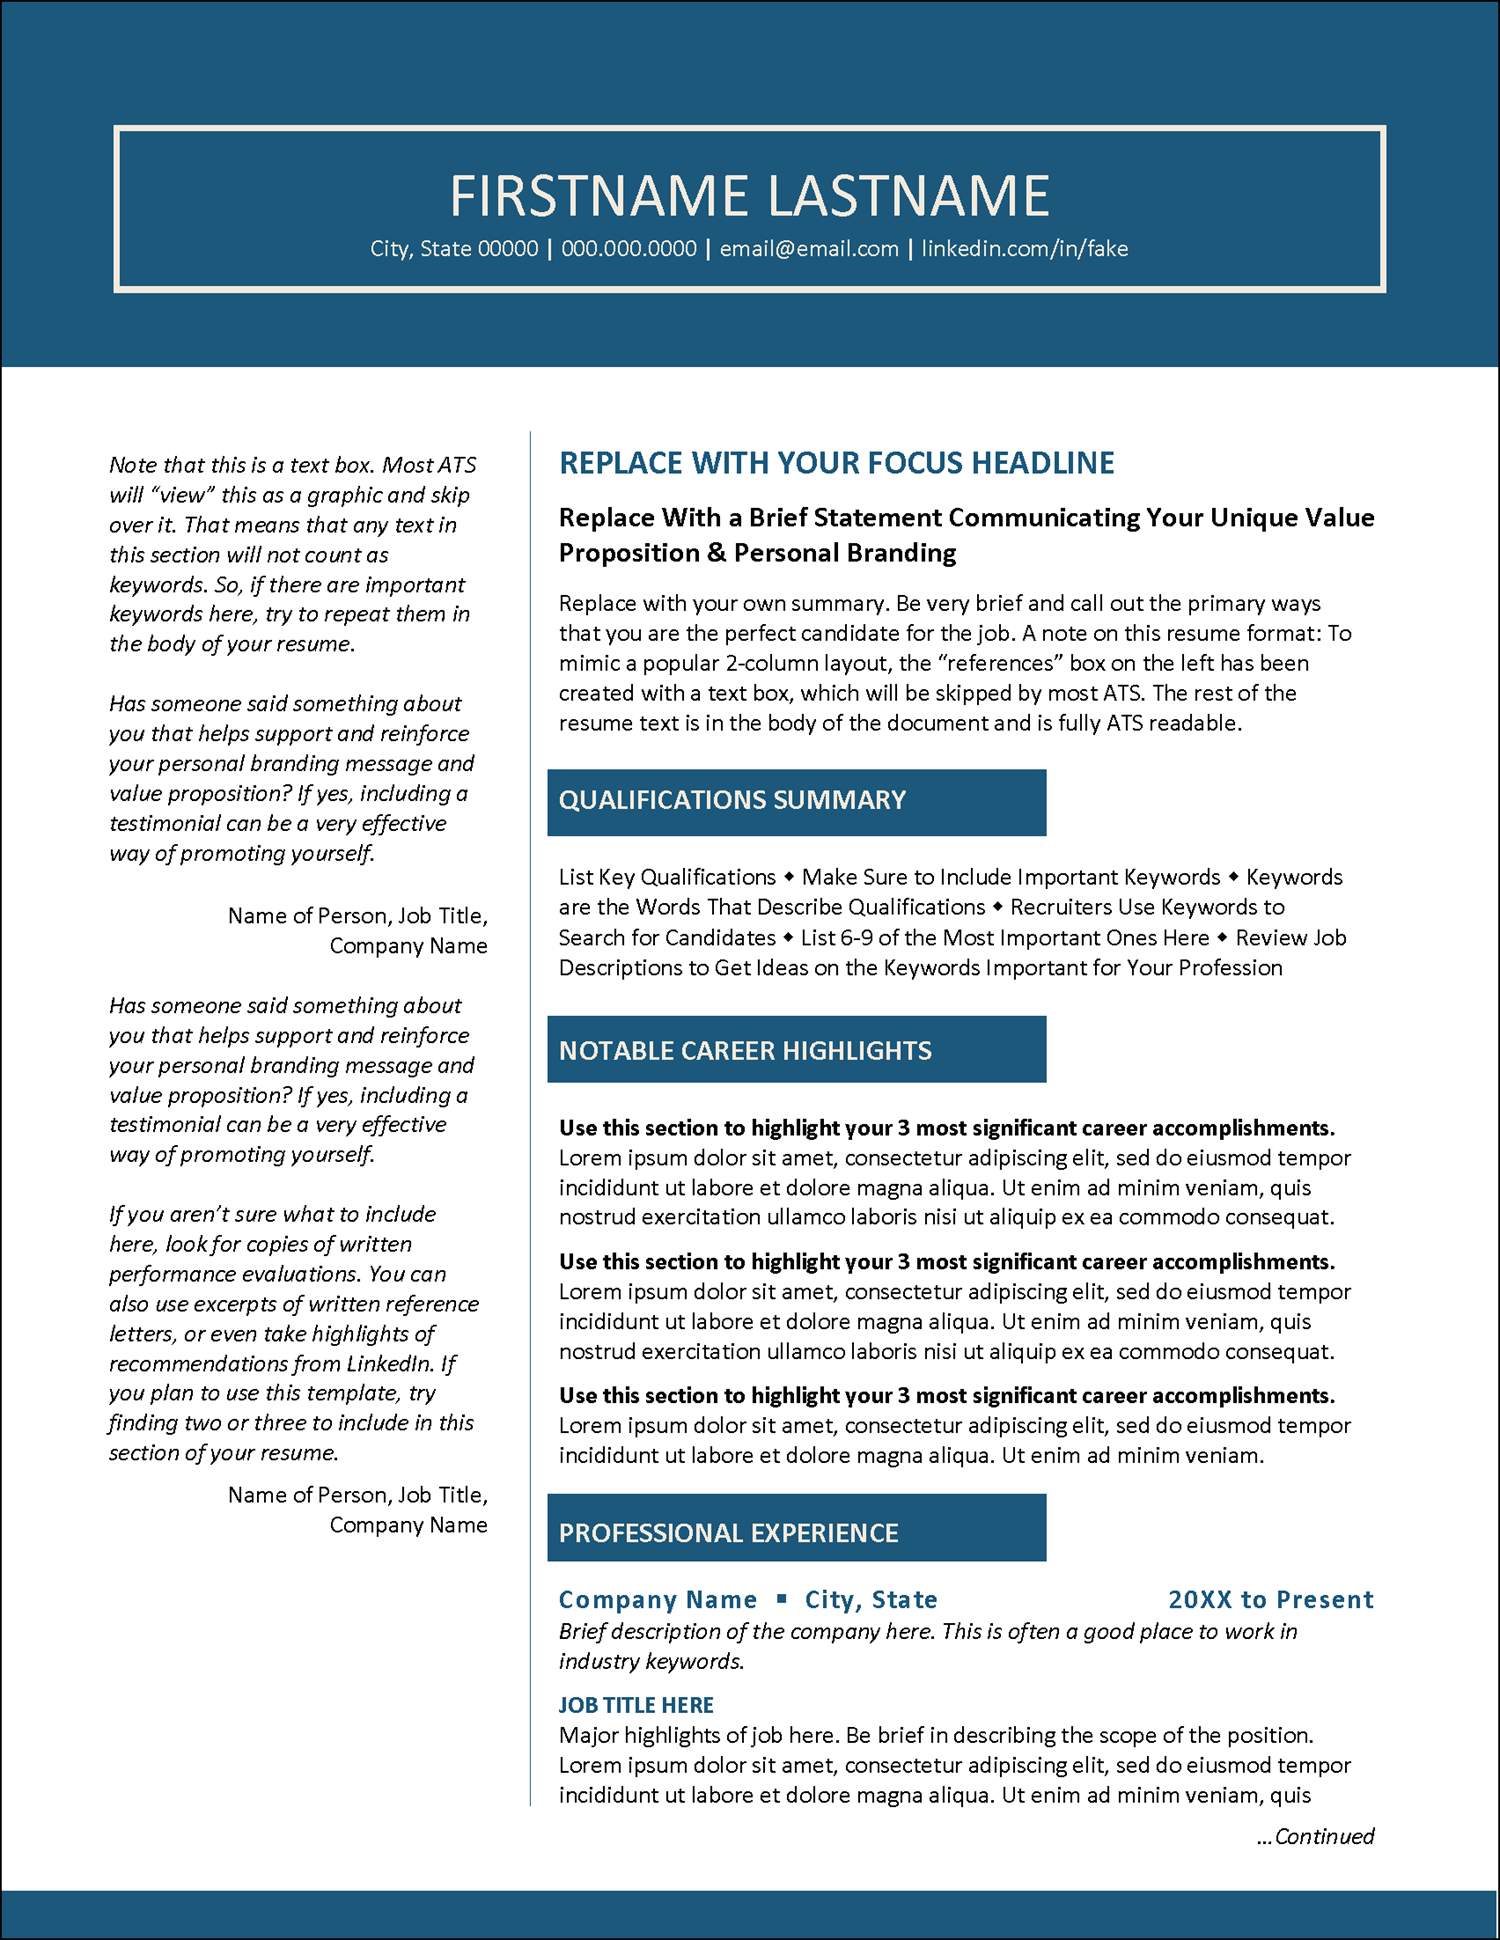 Resume with References Page 1